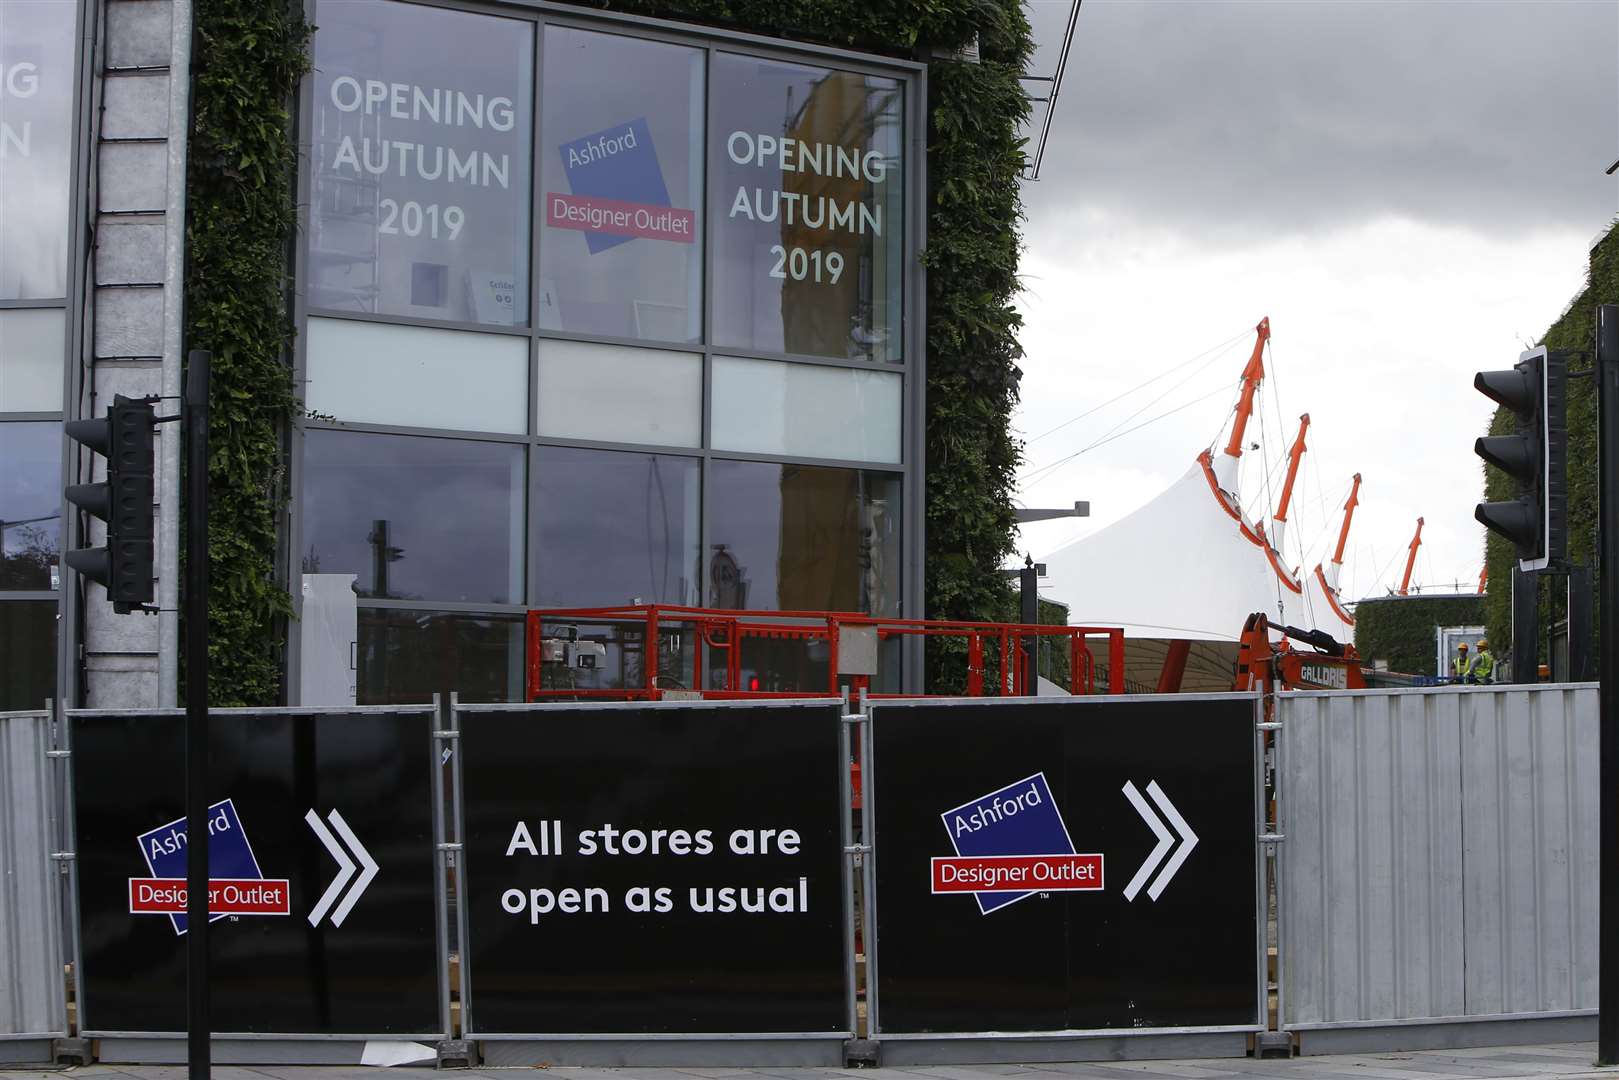 The Designer Outlet extension will open in early November, marking the end of two years of construction work. Picture: Andy Jones